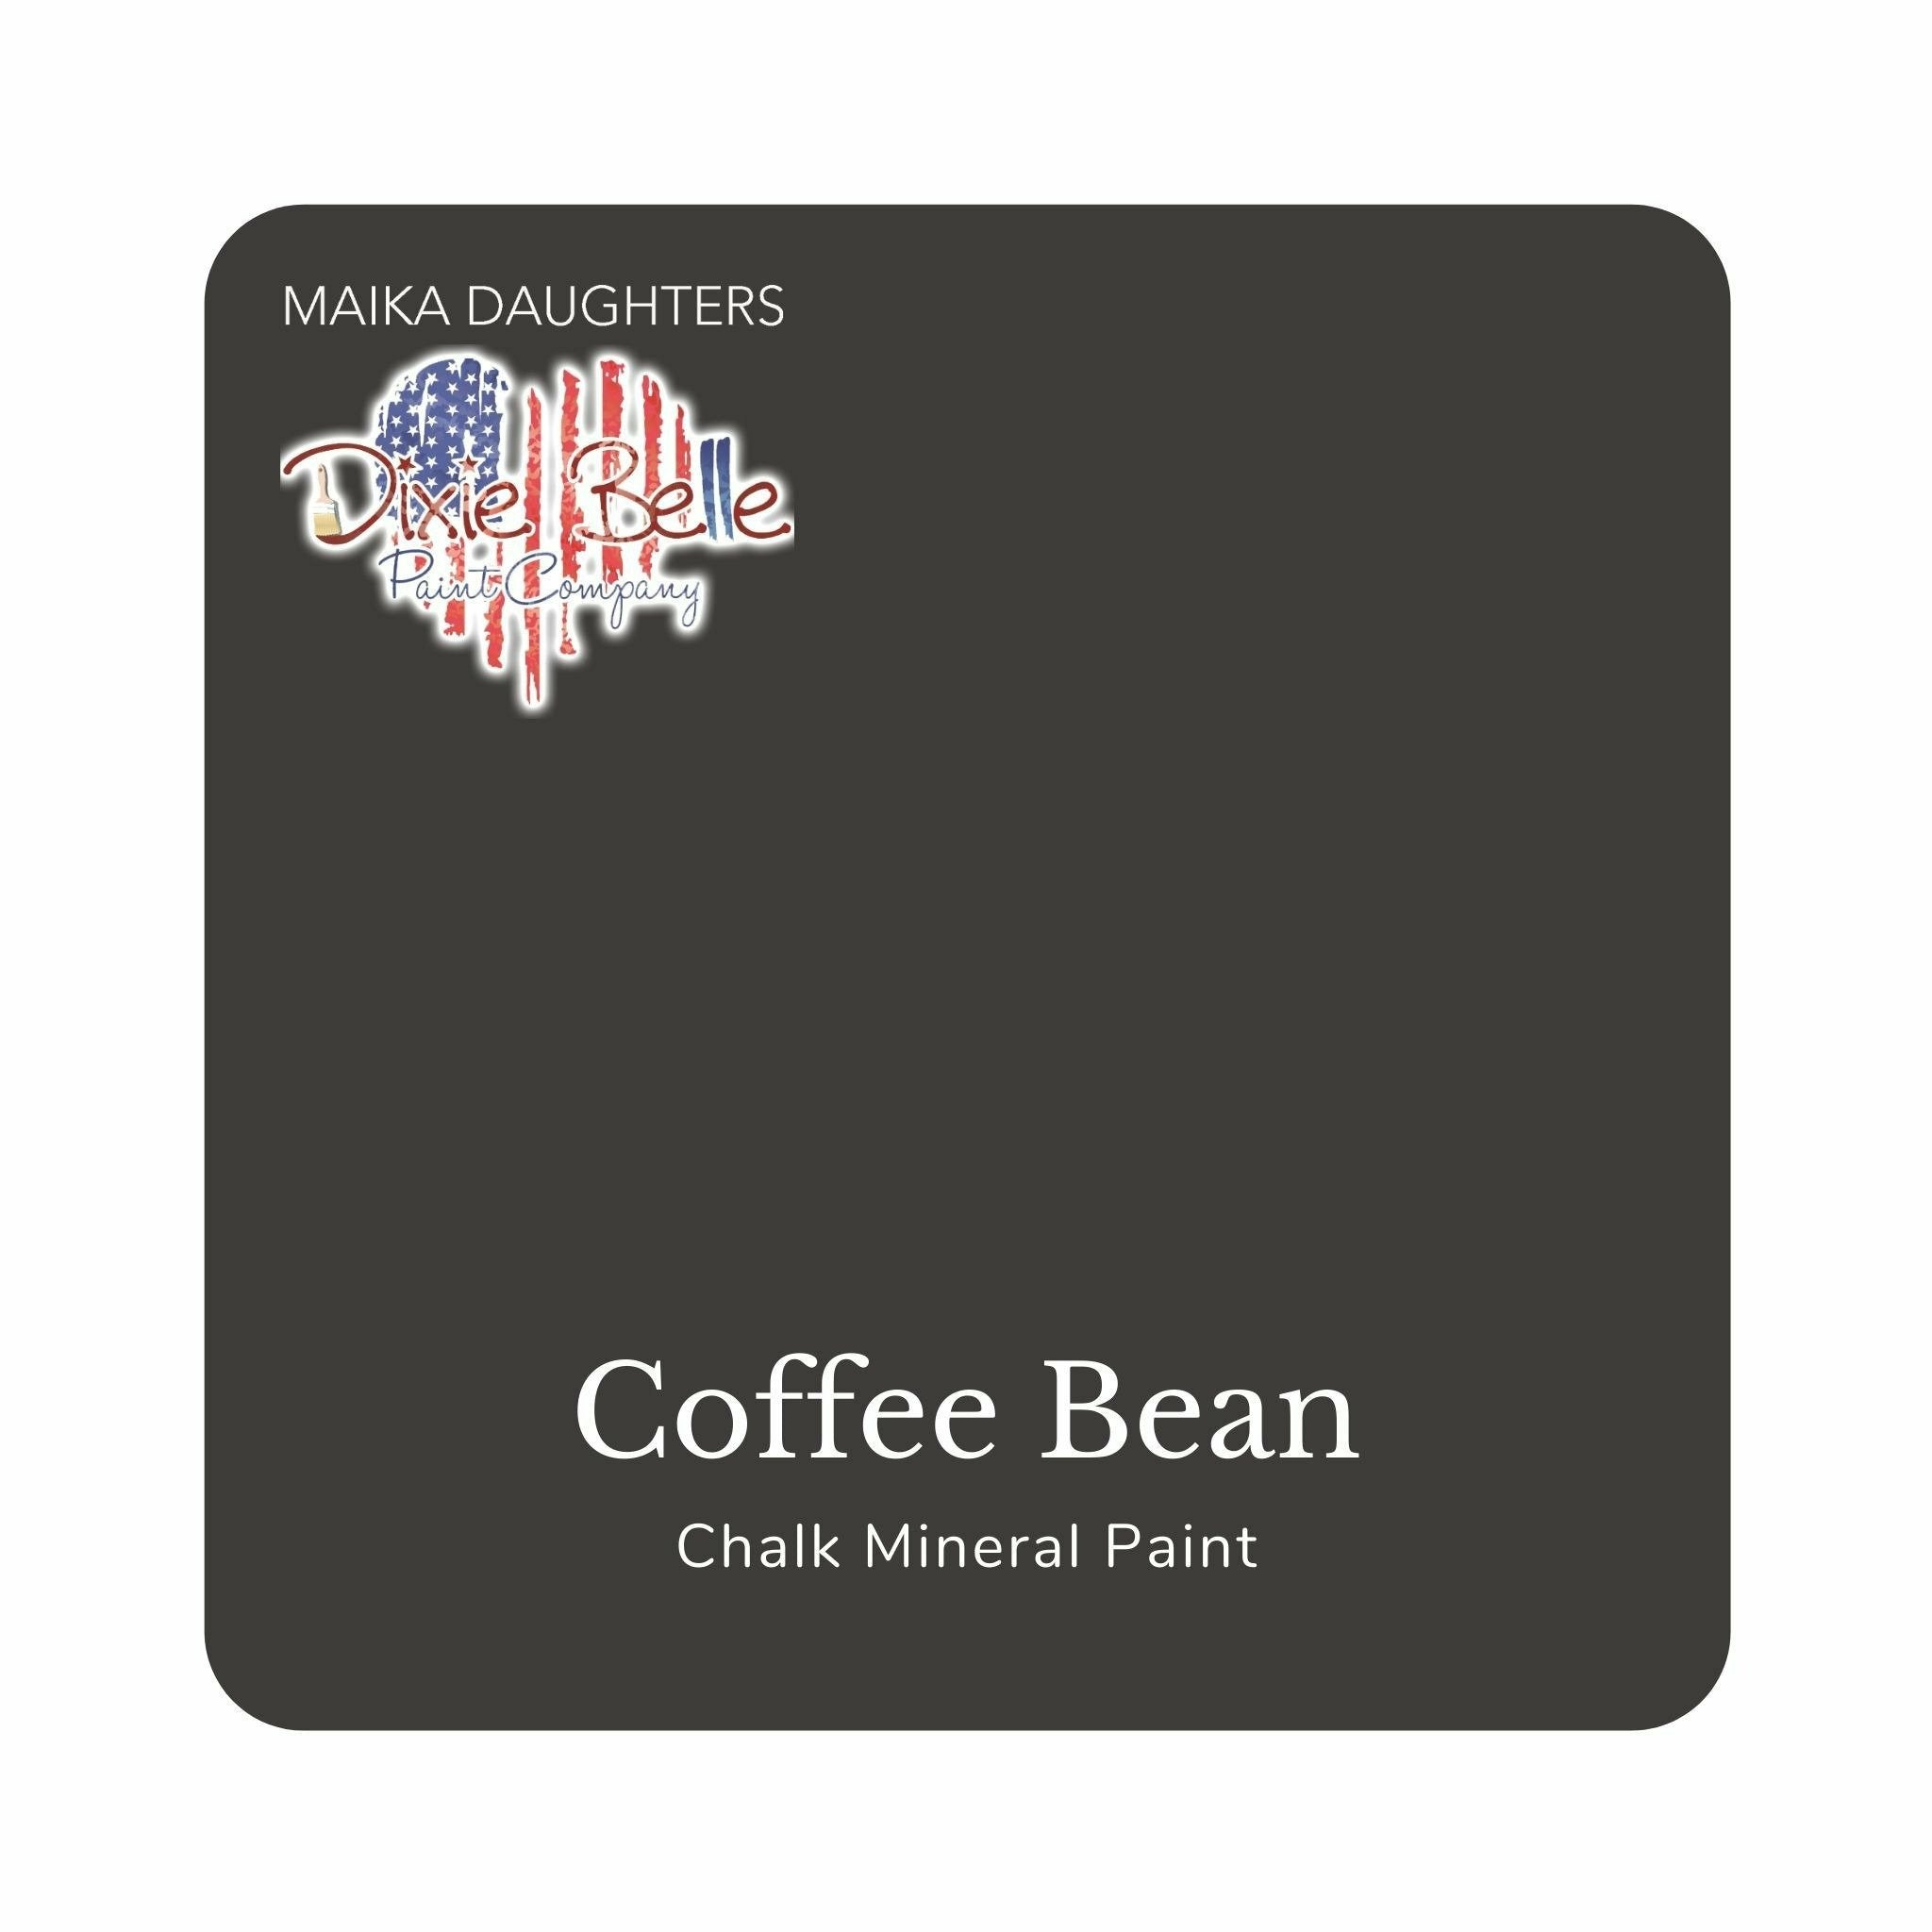 A square swatch card of Dixie Belle Paint Company’s Coffee Bean Chalk Mineral Paint is against a white background. This color is a dark espresso brown.